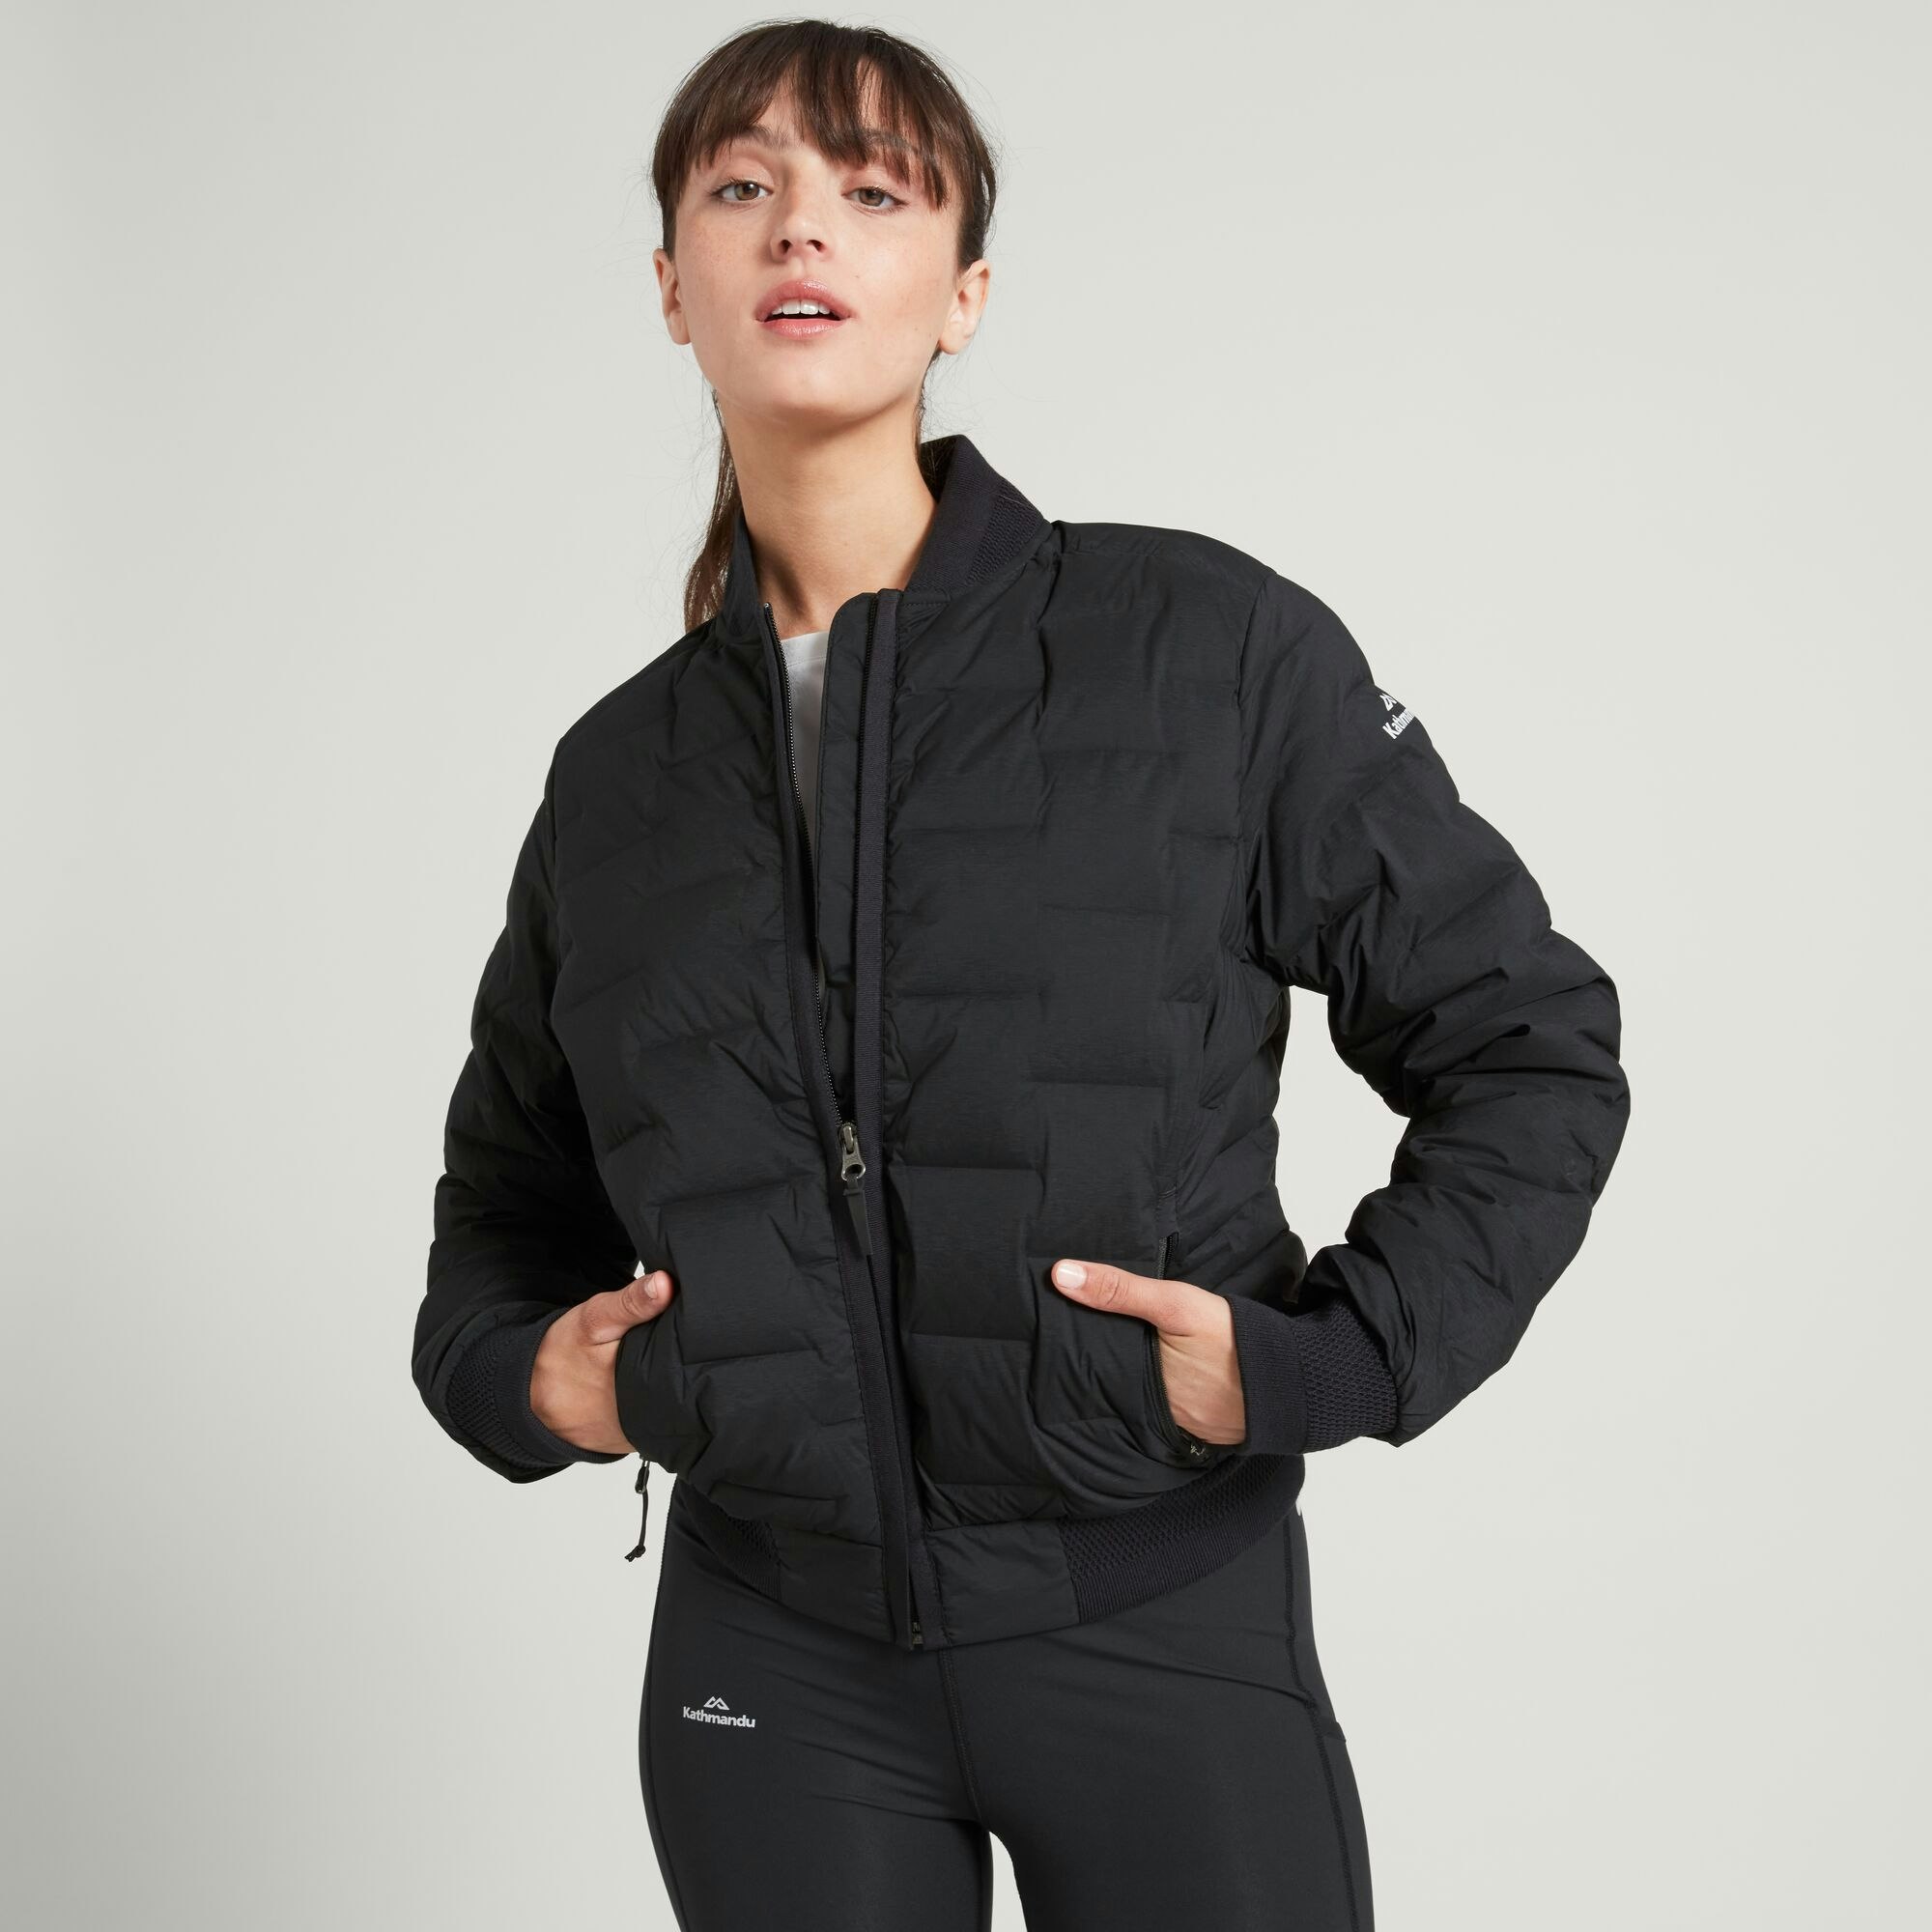 https://kmd-assets.imgix.net/catalog/product/a/1/a1112_902_federate_womens_stretch_down_bomber_puffer_jacket_v3_black_a.jpg?auto=compress%2Cformat&fit=cover&ar=100%3A100&ixlib=react-9.5.1-beta.1